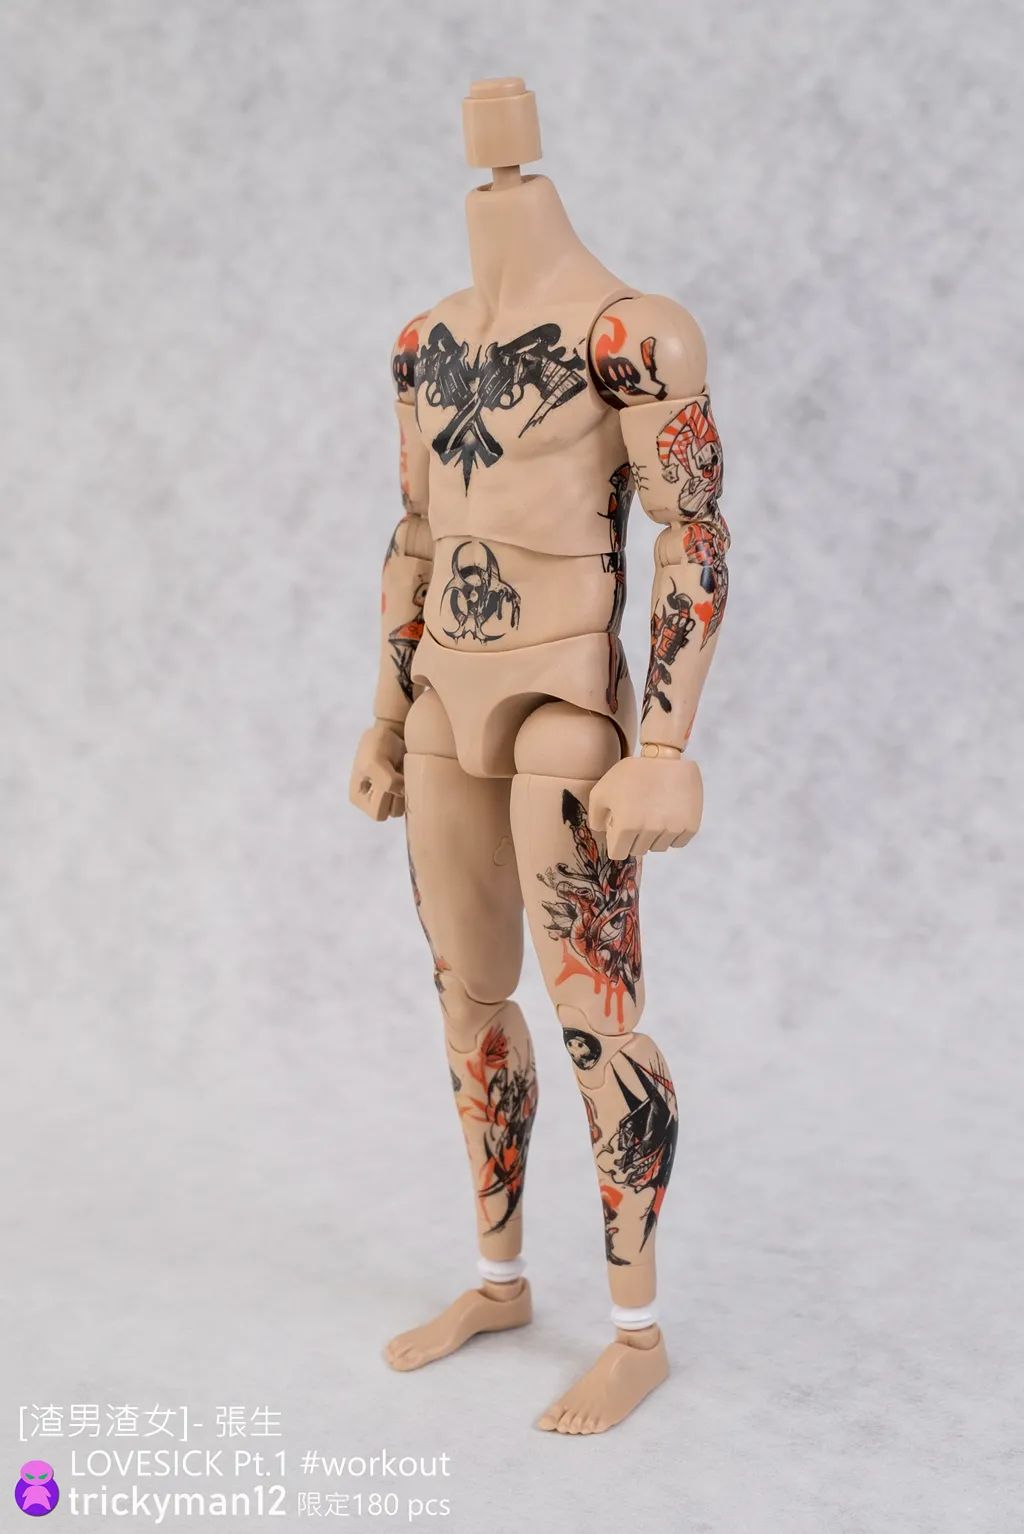 trickyMan12 - NEW PRODUCT: Trickyman12: 1/6 "Scumbag" series - Zhang Sheng LOVESICK Pt.1 action figure 17562611